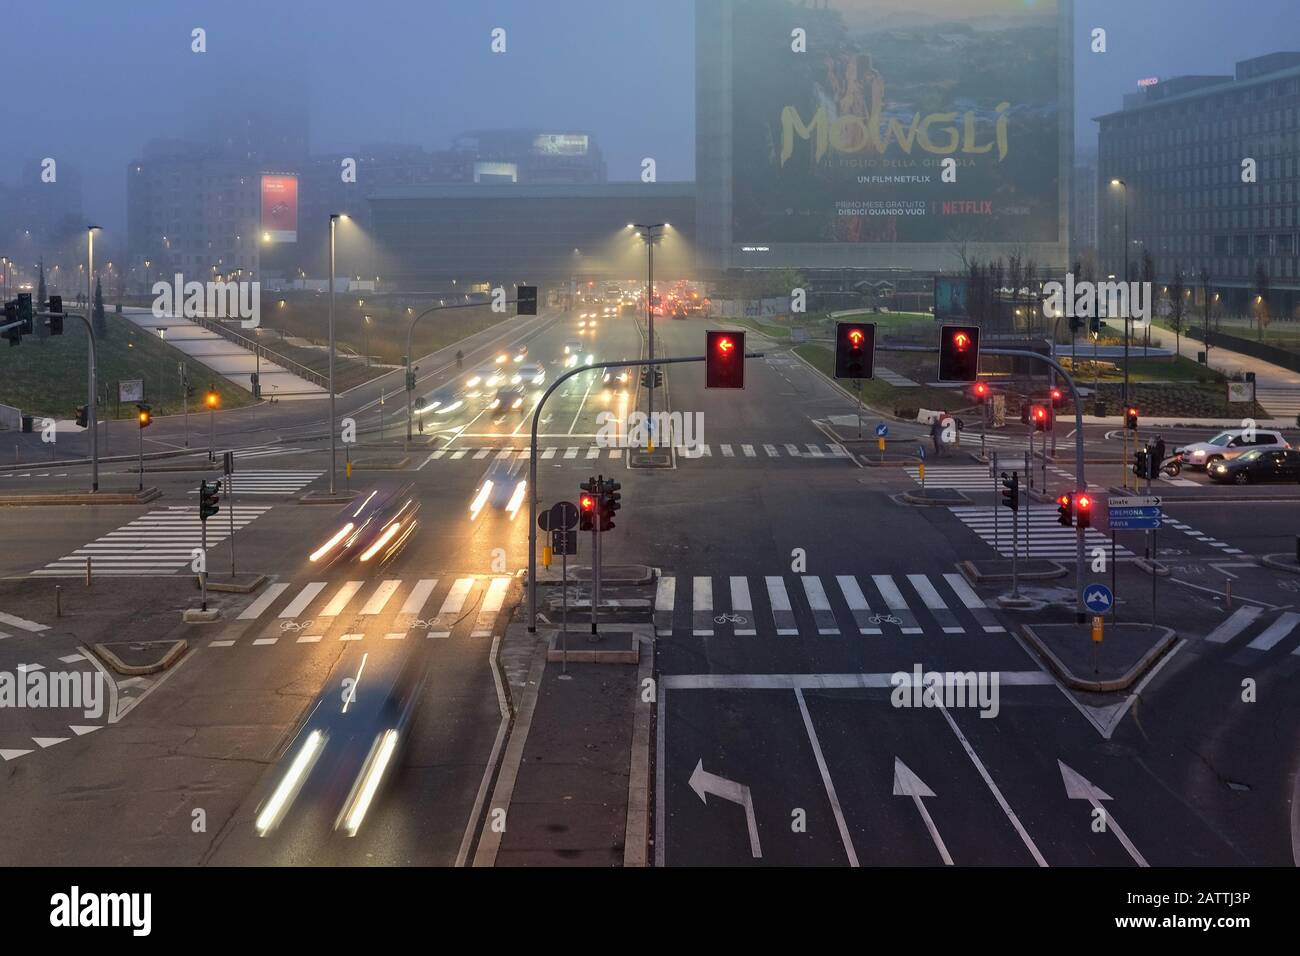 Via Melchiorre Gioia in the evening fog with traffic lights and moving cars, seen from the suspended pedestrian walkway of Piazza Alvar Aalto, Milan Stock Photo